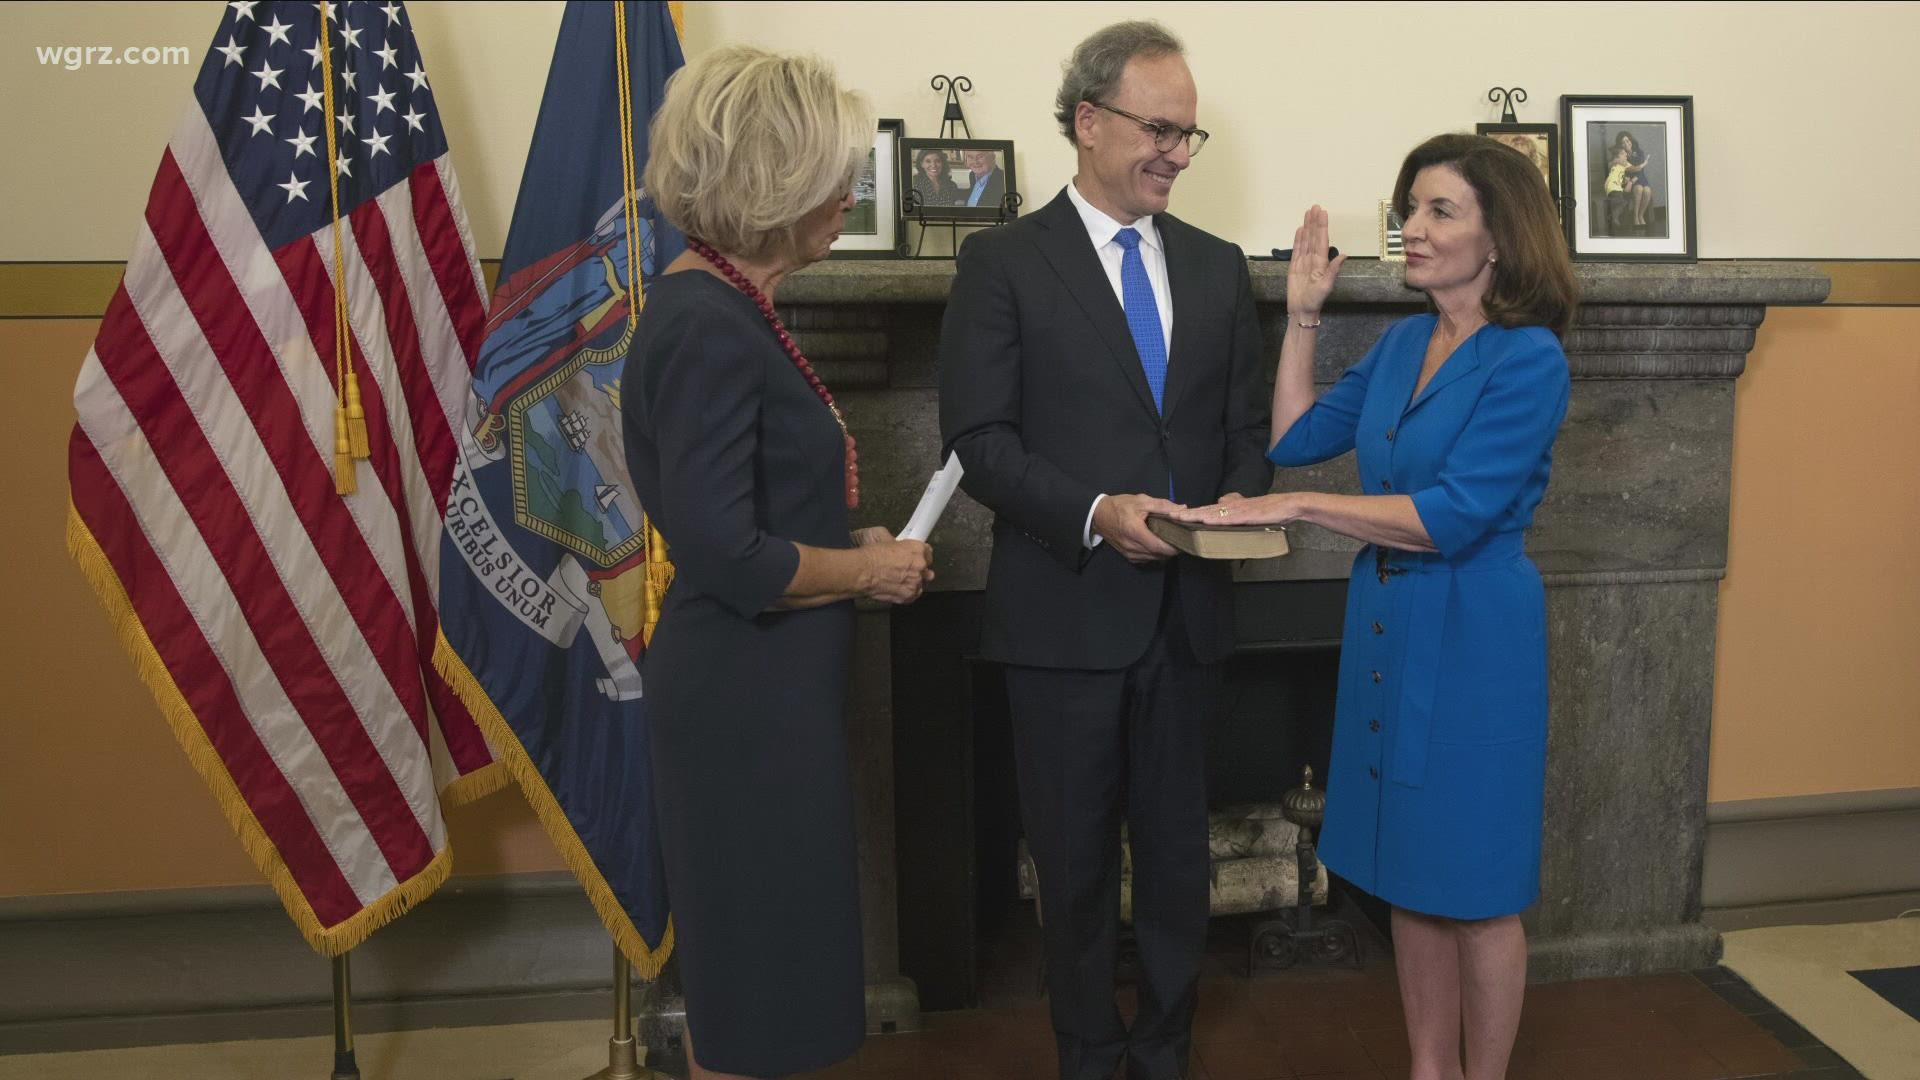 Tuesday morning Hochul was sworn in with her husband Bill Hochul who was once the U.S. attorney for Western New York standing by her side.